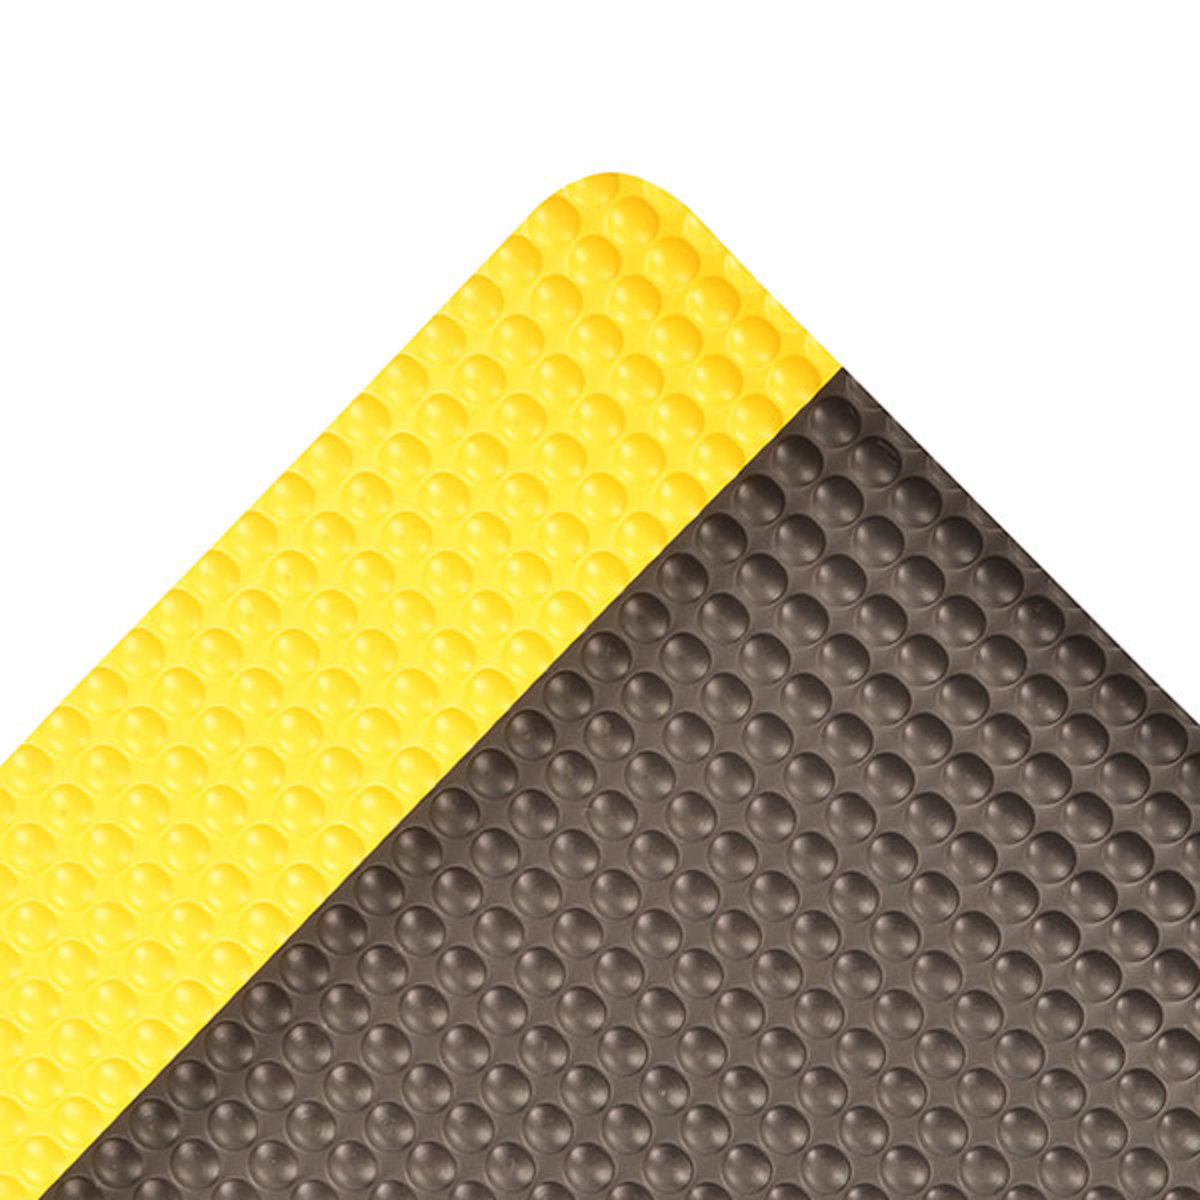 Superior Manufacturing 2' X 3' Black With Yellow Edge Vinyl NoTrax® Bubble Trax® Anti-Fatigue Floor Mat